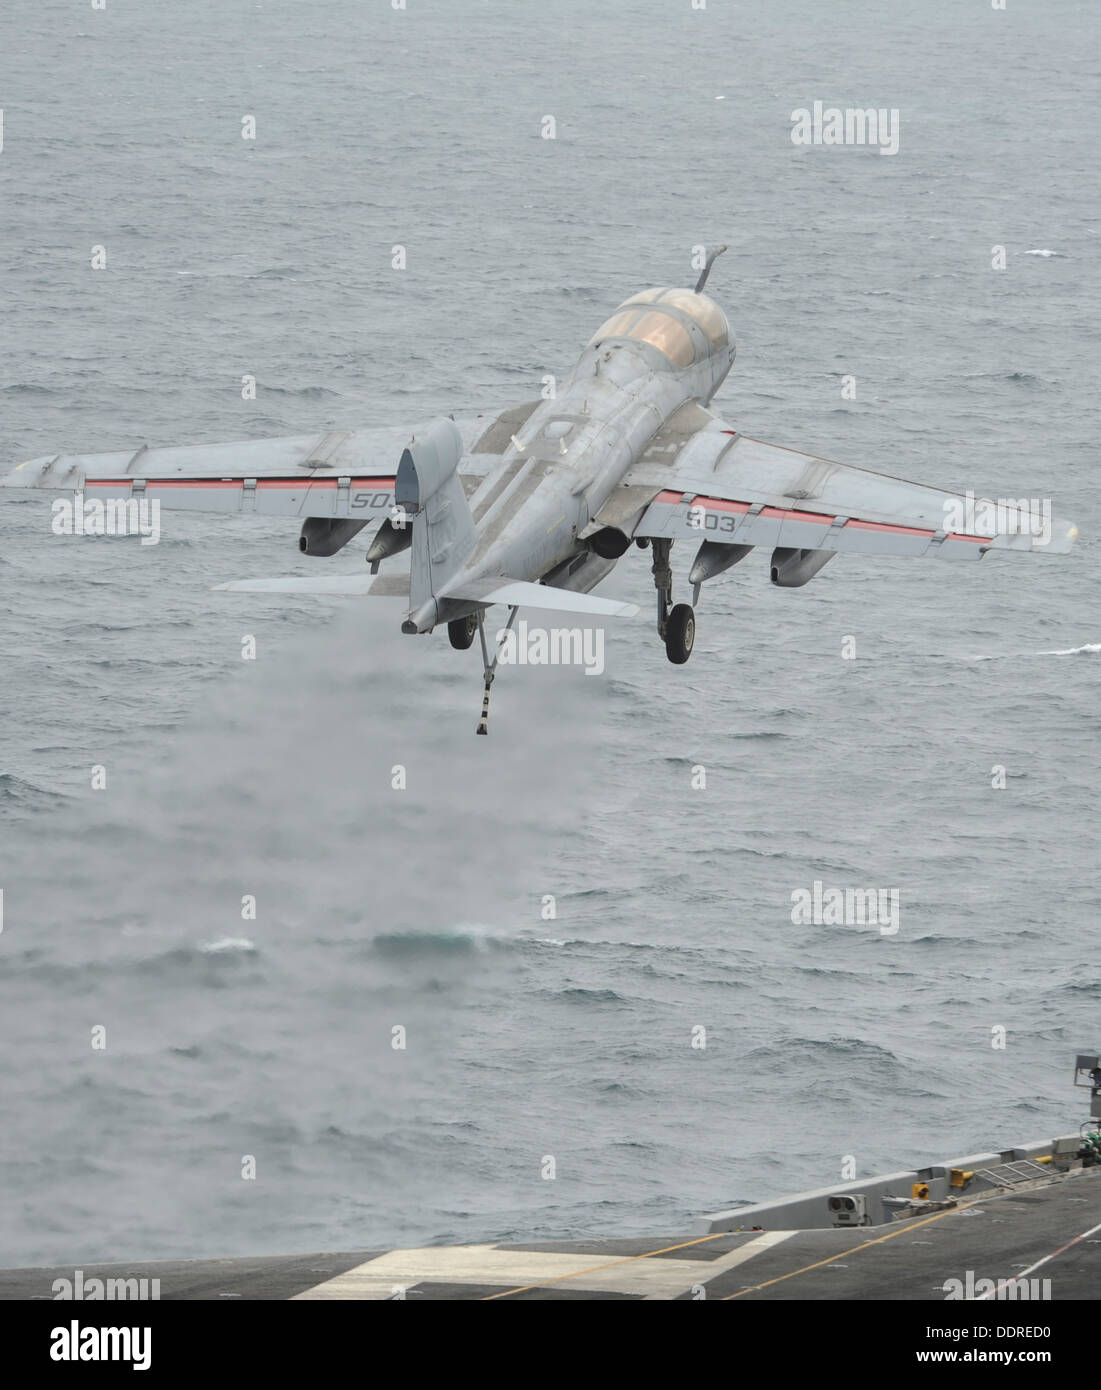 An EA-6B Prowler assigned to the Gray Wolves of Electronic Attack Squadron (VAQ) 142 launches off the flight deck of the aircraft carrier USS Nimitz (CVN 68). The Nimitz Carrier Strike Group is deployed to the U.S. 5th Fleet area of responsibility conduct Stock Photo